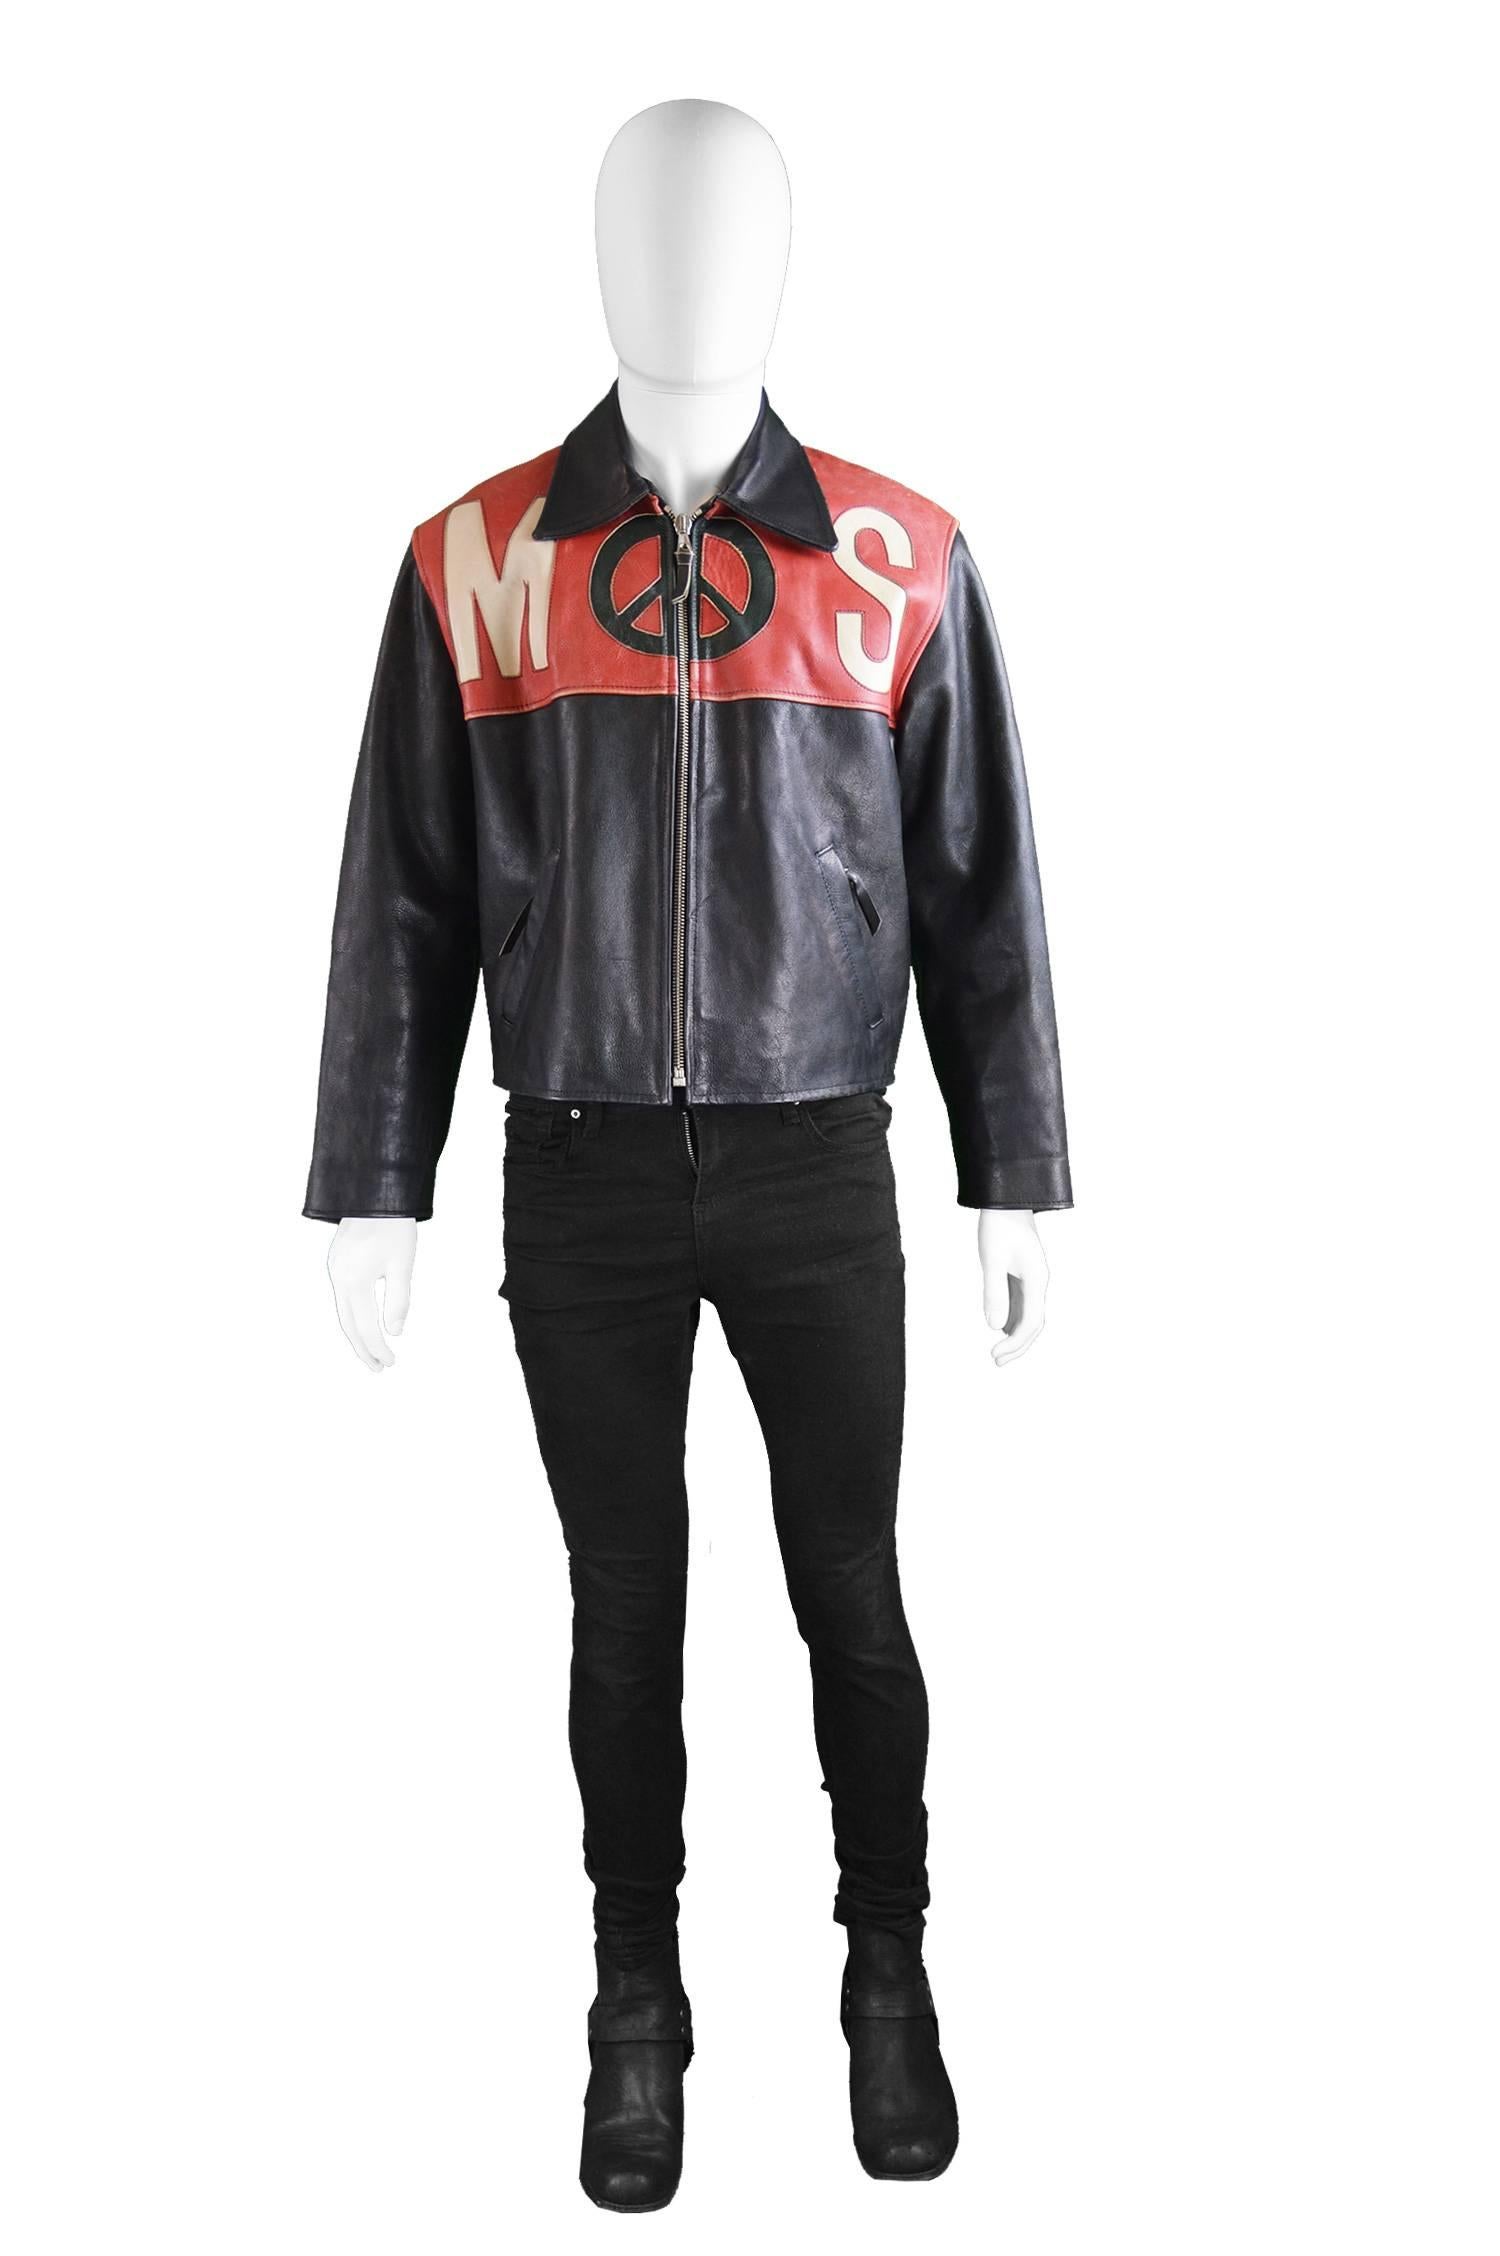 Moschino Men's Vintage Black and Red Love Heart Leather Coat, 1990s

Please Click +CONTINUE READING to see measurements, description and condition. 

Estimated Size: Men's Medium. Please check measurements.
Chest - 44” / 112cm (please allow roughly